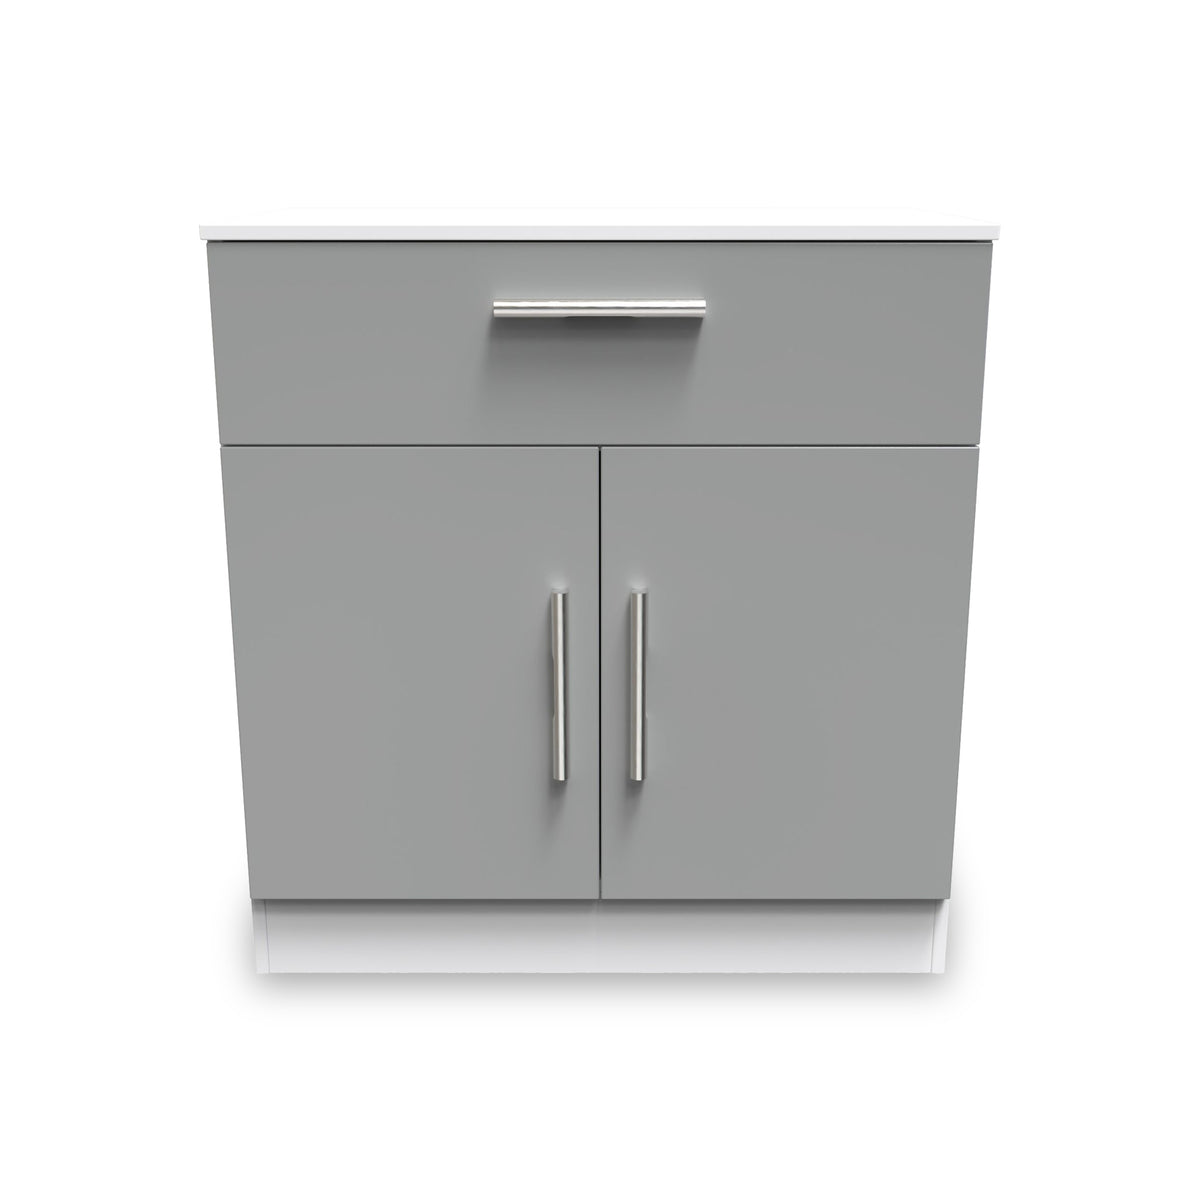 Blakely Grey and White 1 Drawer 2 Door Sideboard from Roseland Furniture